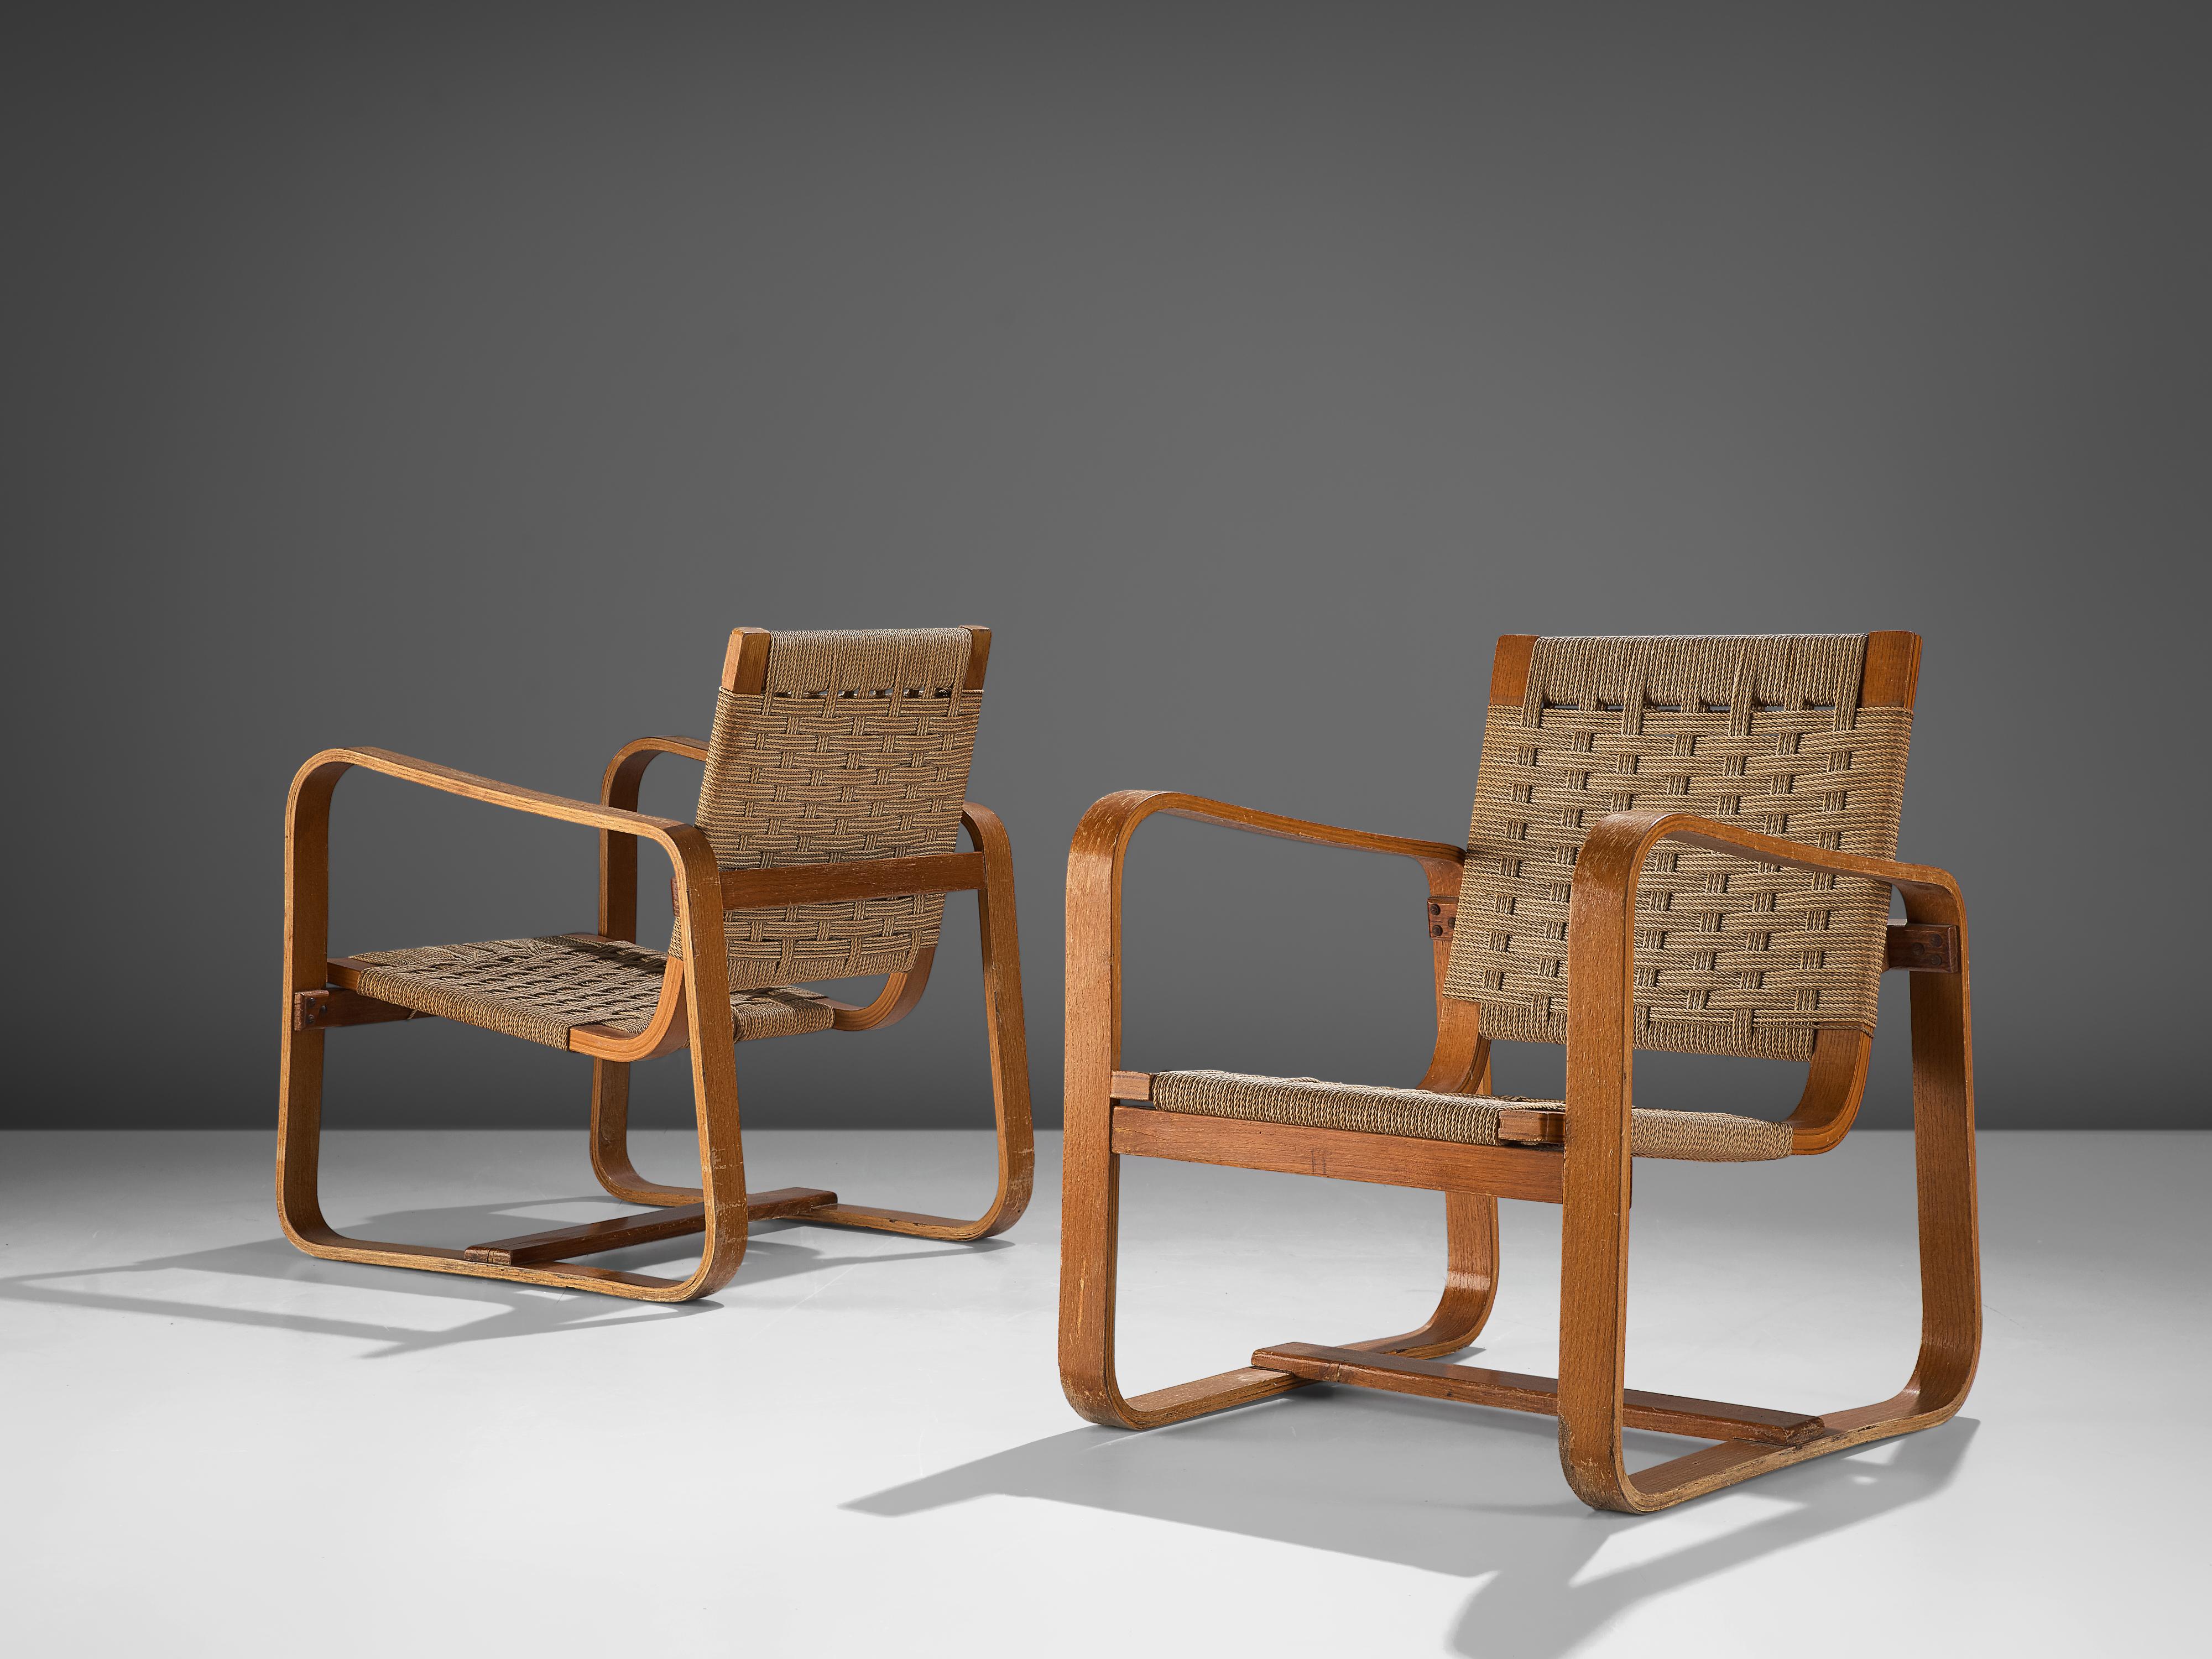 Giuseppe Pagano Pogatschnig, pair or lounge chairs, beech, natural cord, Italy, 1940

Giuseppe Pagano Pogatschnig (1896-1945) designed this bentwood armchair initially in 1940 for ‘l’Università Bocconi di Milano’. Characteristic are the two